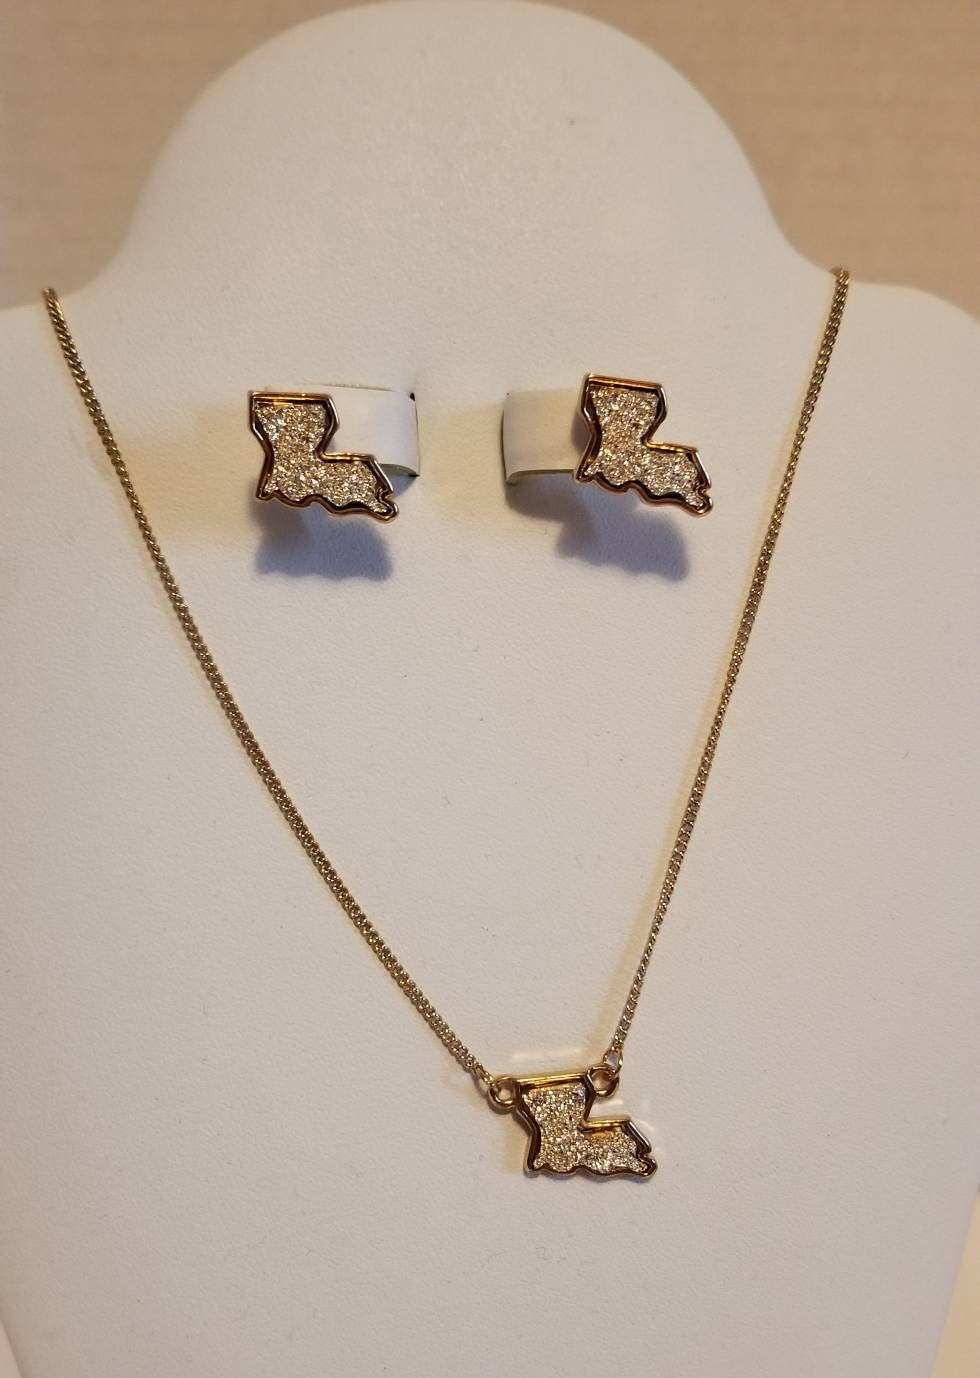 Gold Louisiana Pendant Necklace and earring set